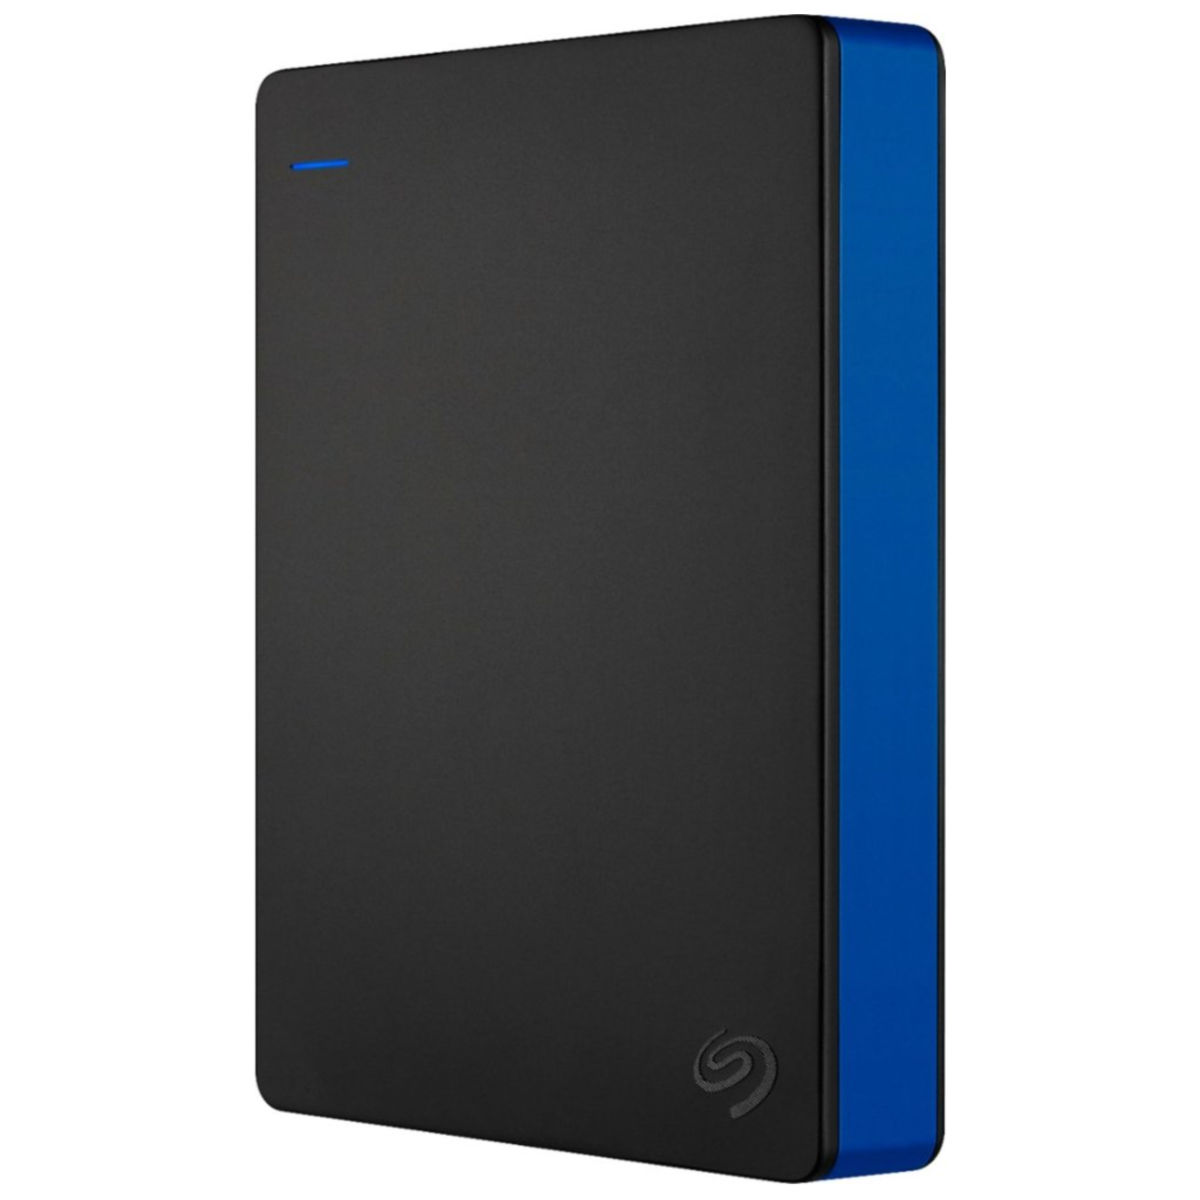 Seagate STGD4000400 Game Drive for PS4 4TB External USB 3.0 Portable Hard Drive